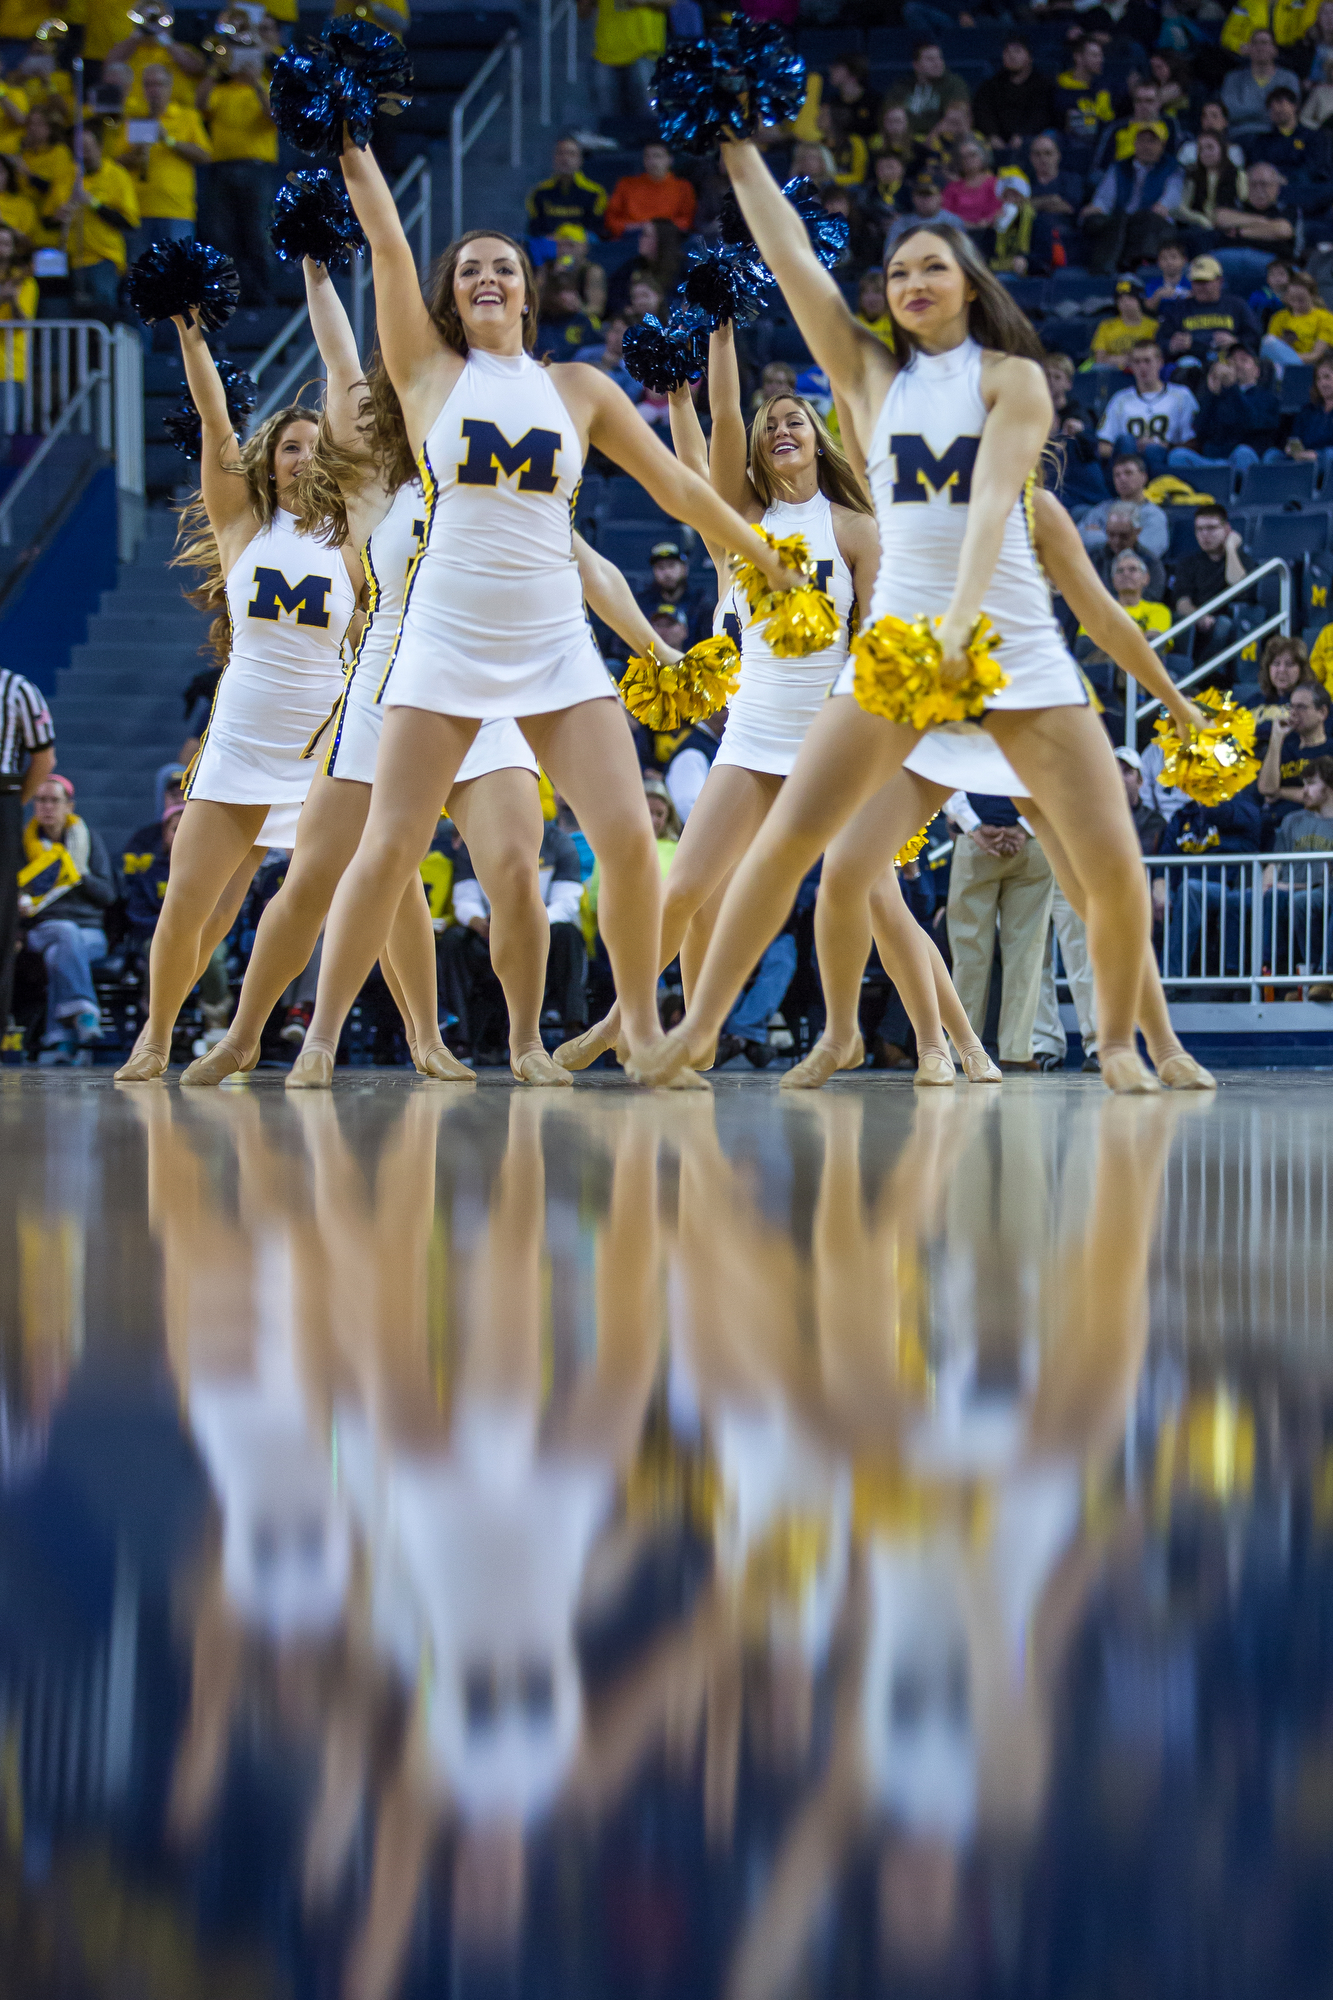  The Michigan dance team dances during a timeout during the second half of play at the Crisler Center on Saturday, December 17, 2016. The Michigan Wolverines beat the Maryland Eastern Shore Hawks 98-49. Matt Weigand | The Ann Arbor News 